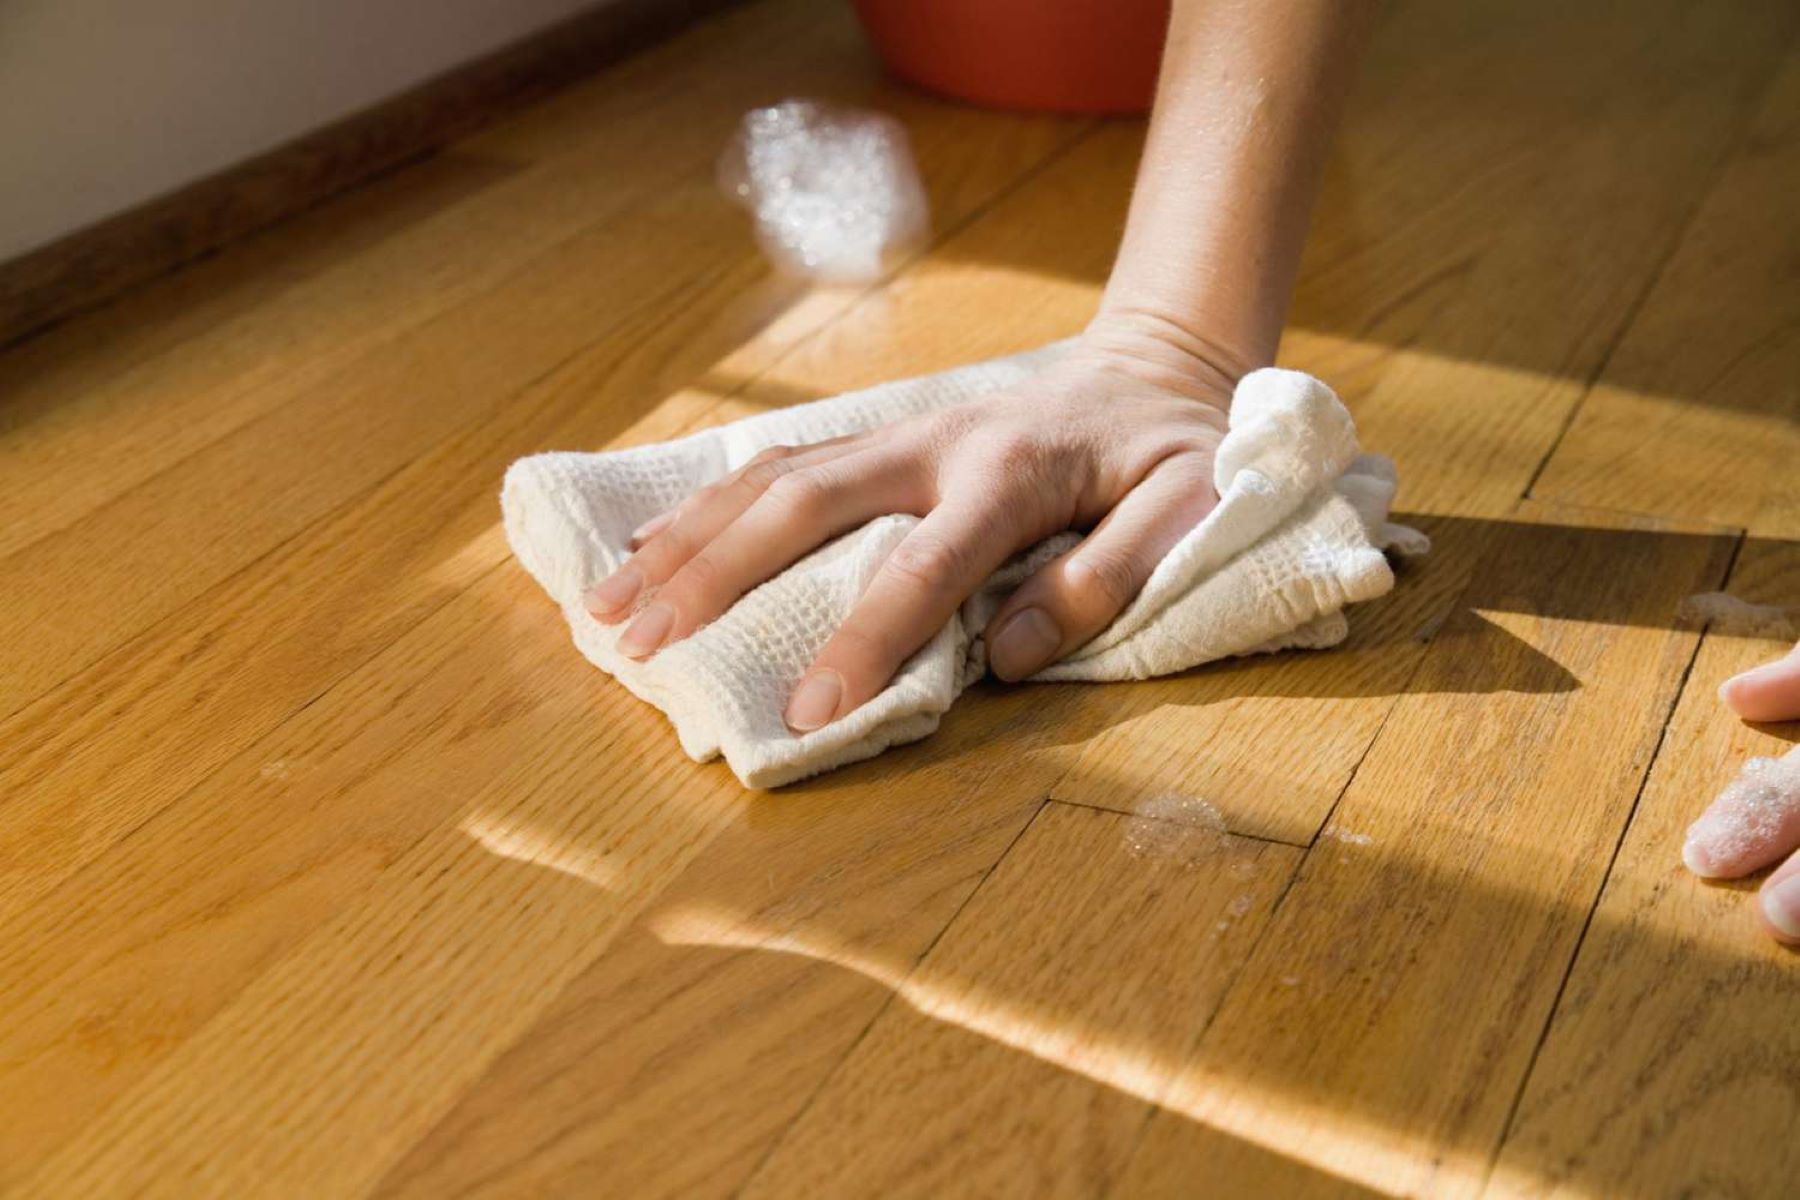 How To Clean A Floor Without A Mop